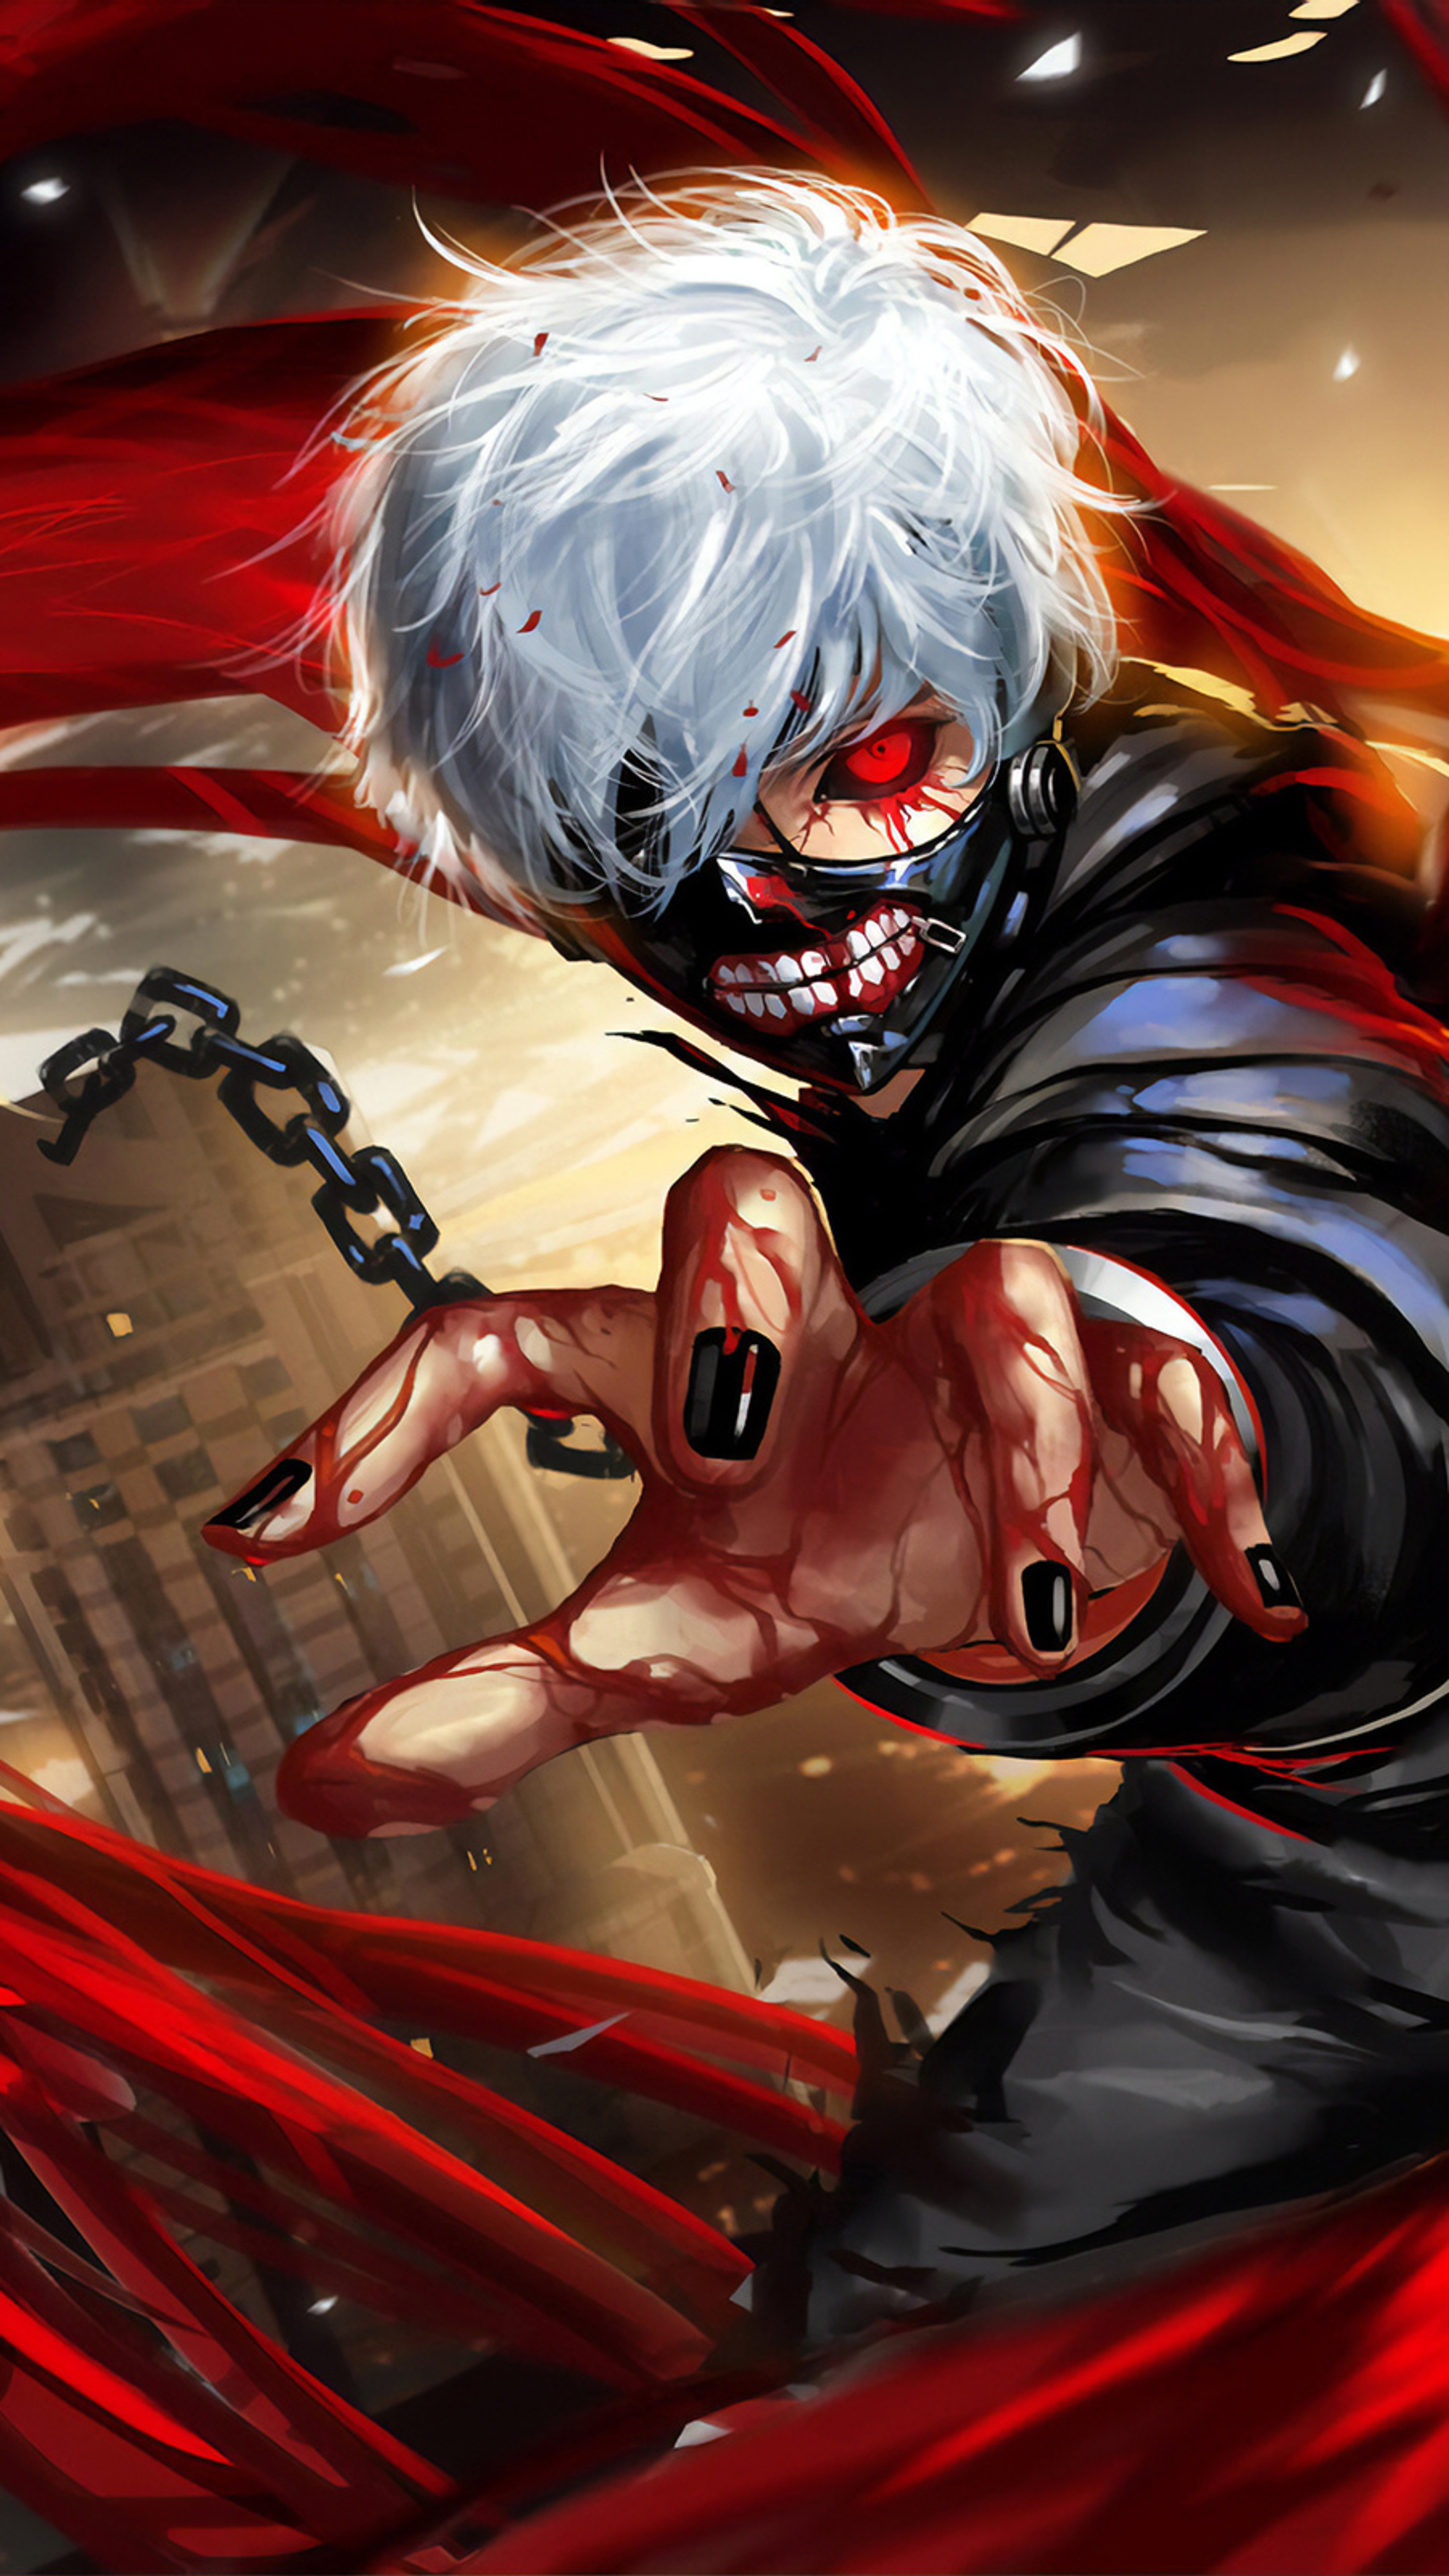 Tokyo Ghoul anime, Fanart wallpapers, Sony Xperia devices, Artistic expressions, 2160x3840 4K Handy